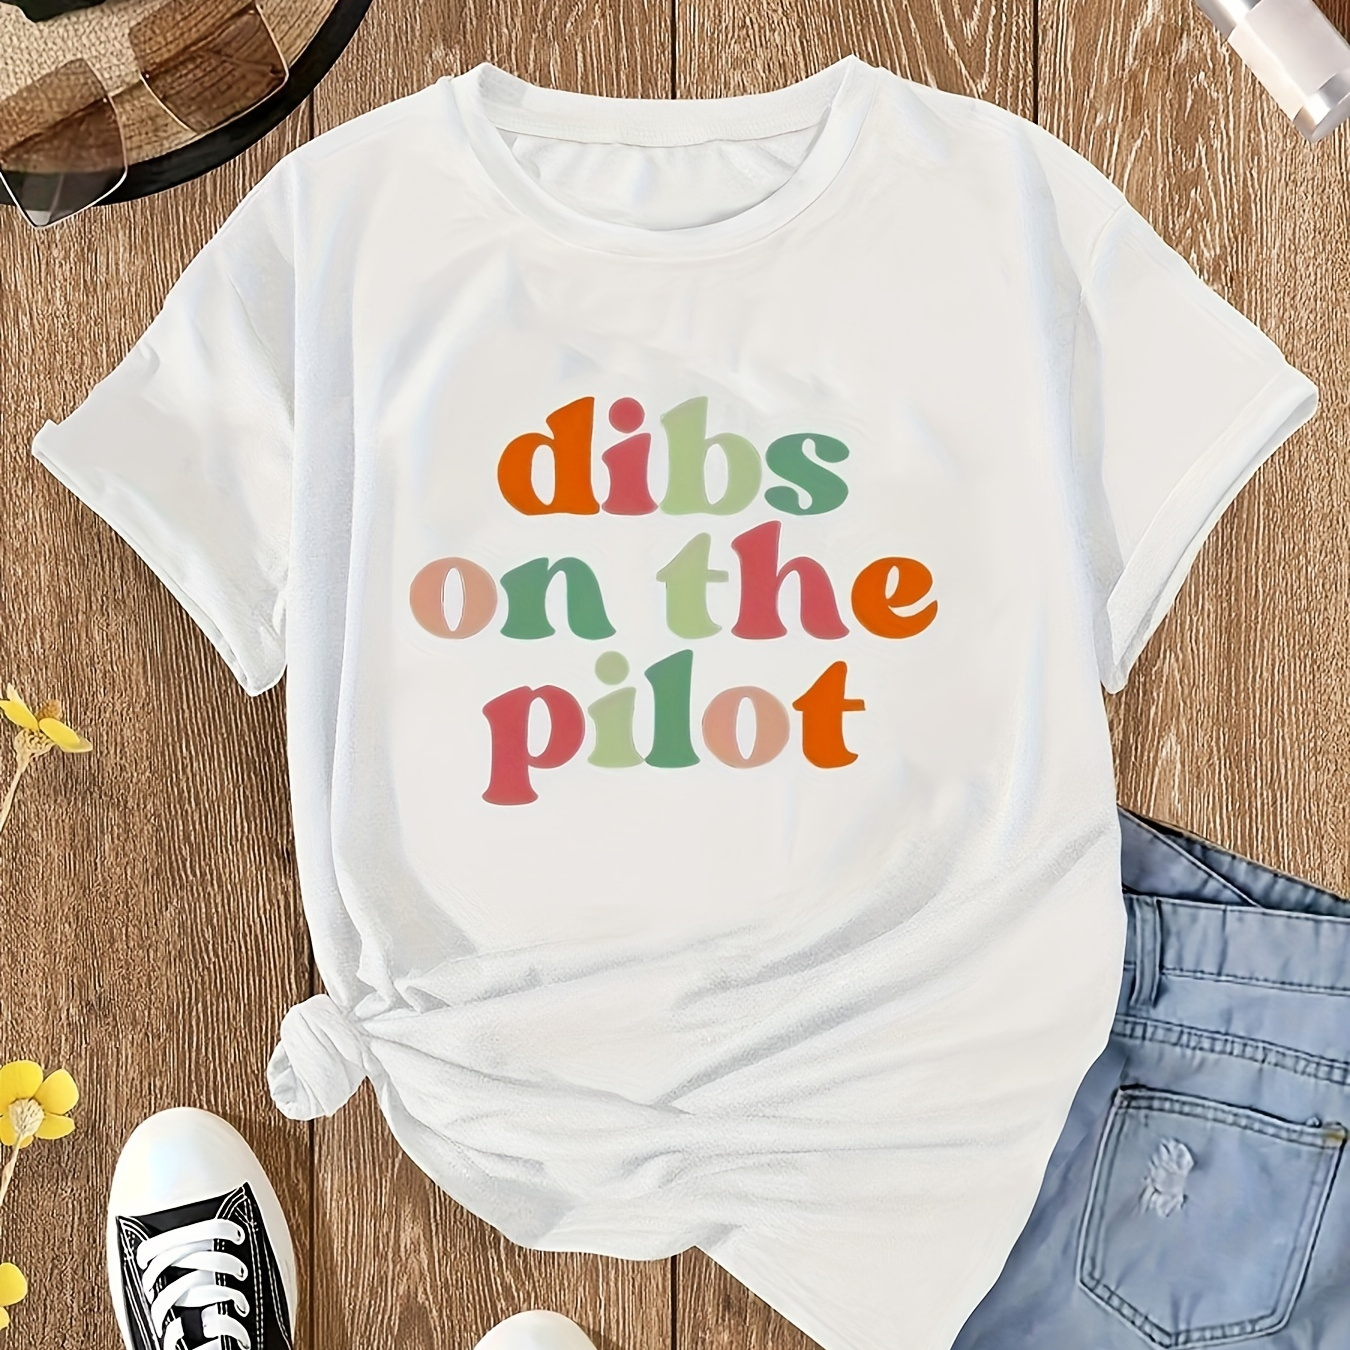 

Women's Casual Colorful Letter Print Short Sleeve T-shirt, Fashion Trendy Round Neck Tee, "dibs On The Pilot" Slogan, Easy Wear Top